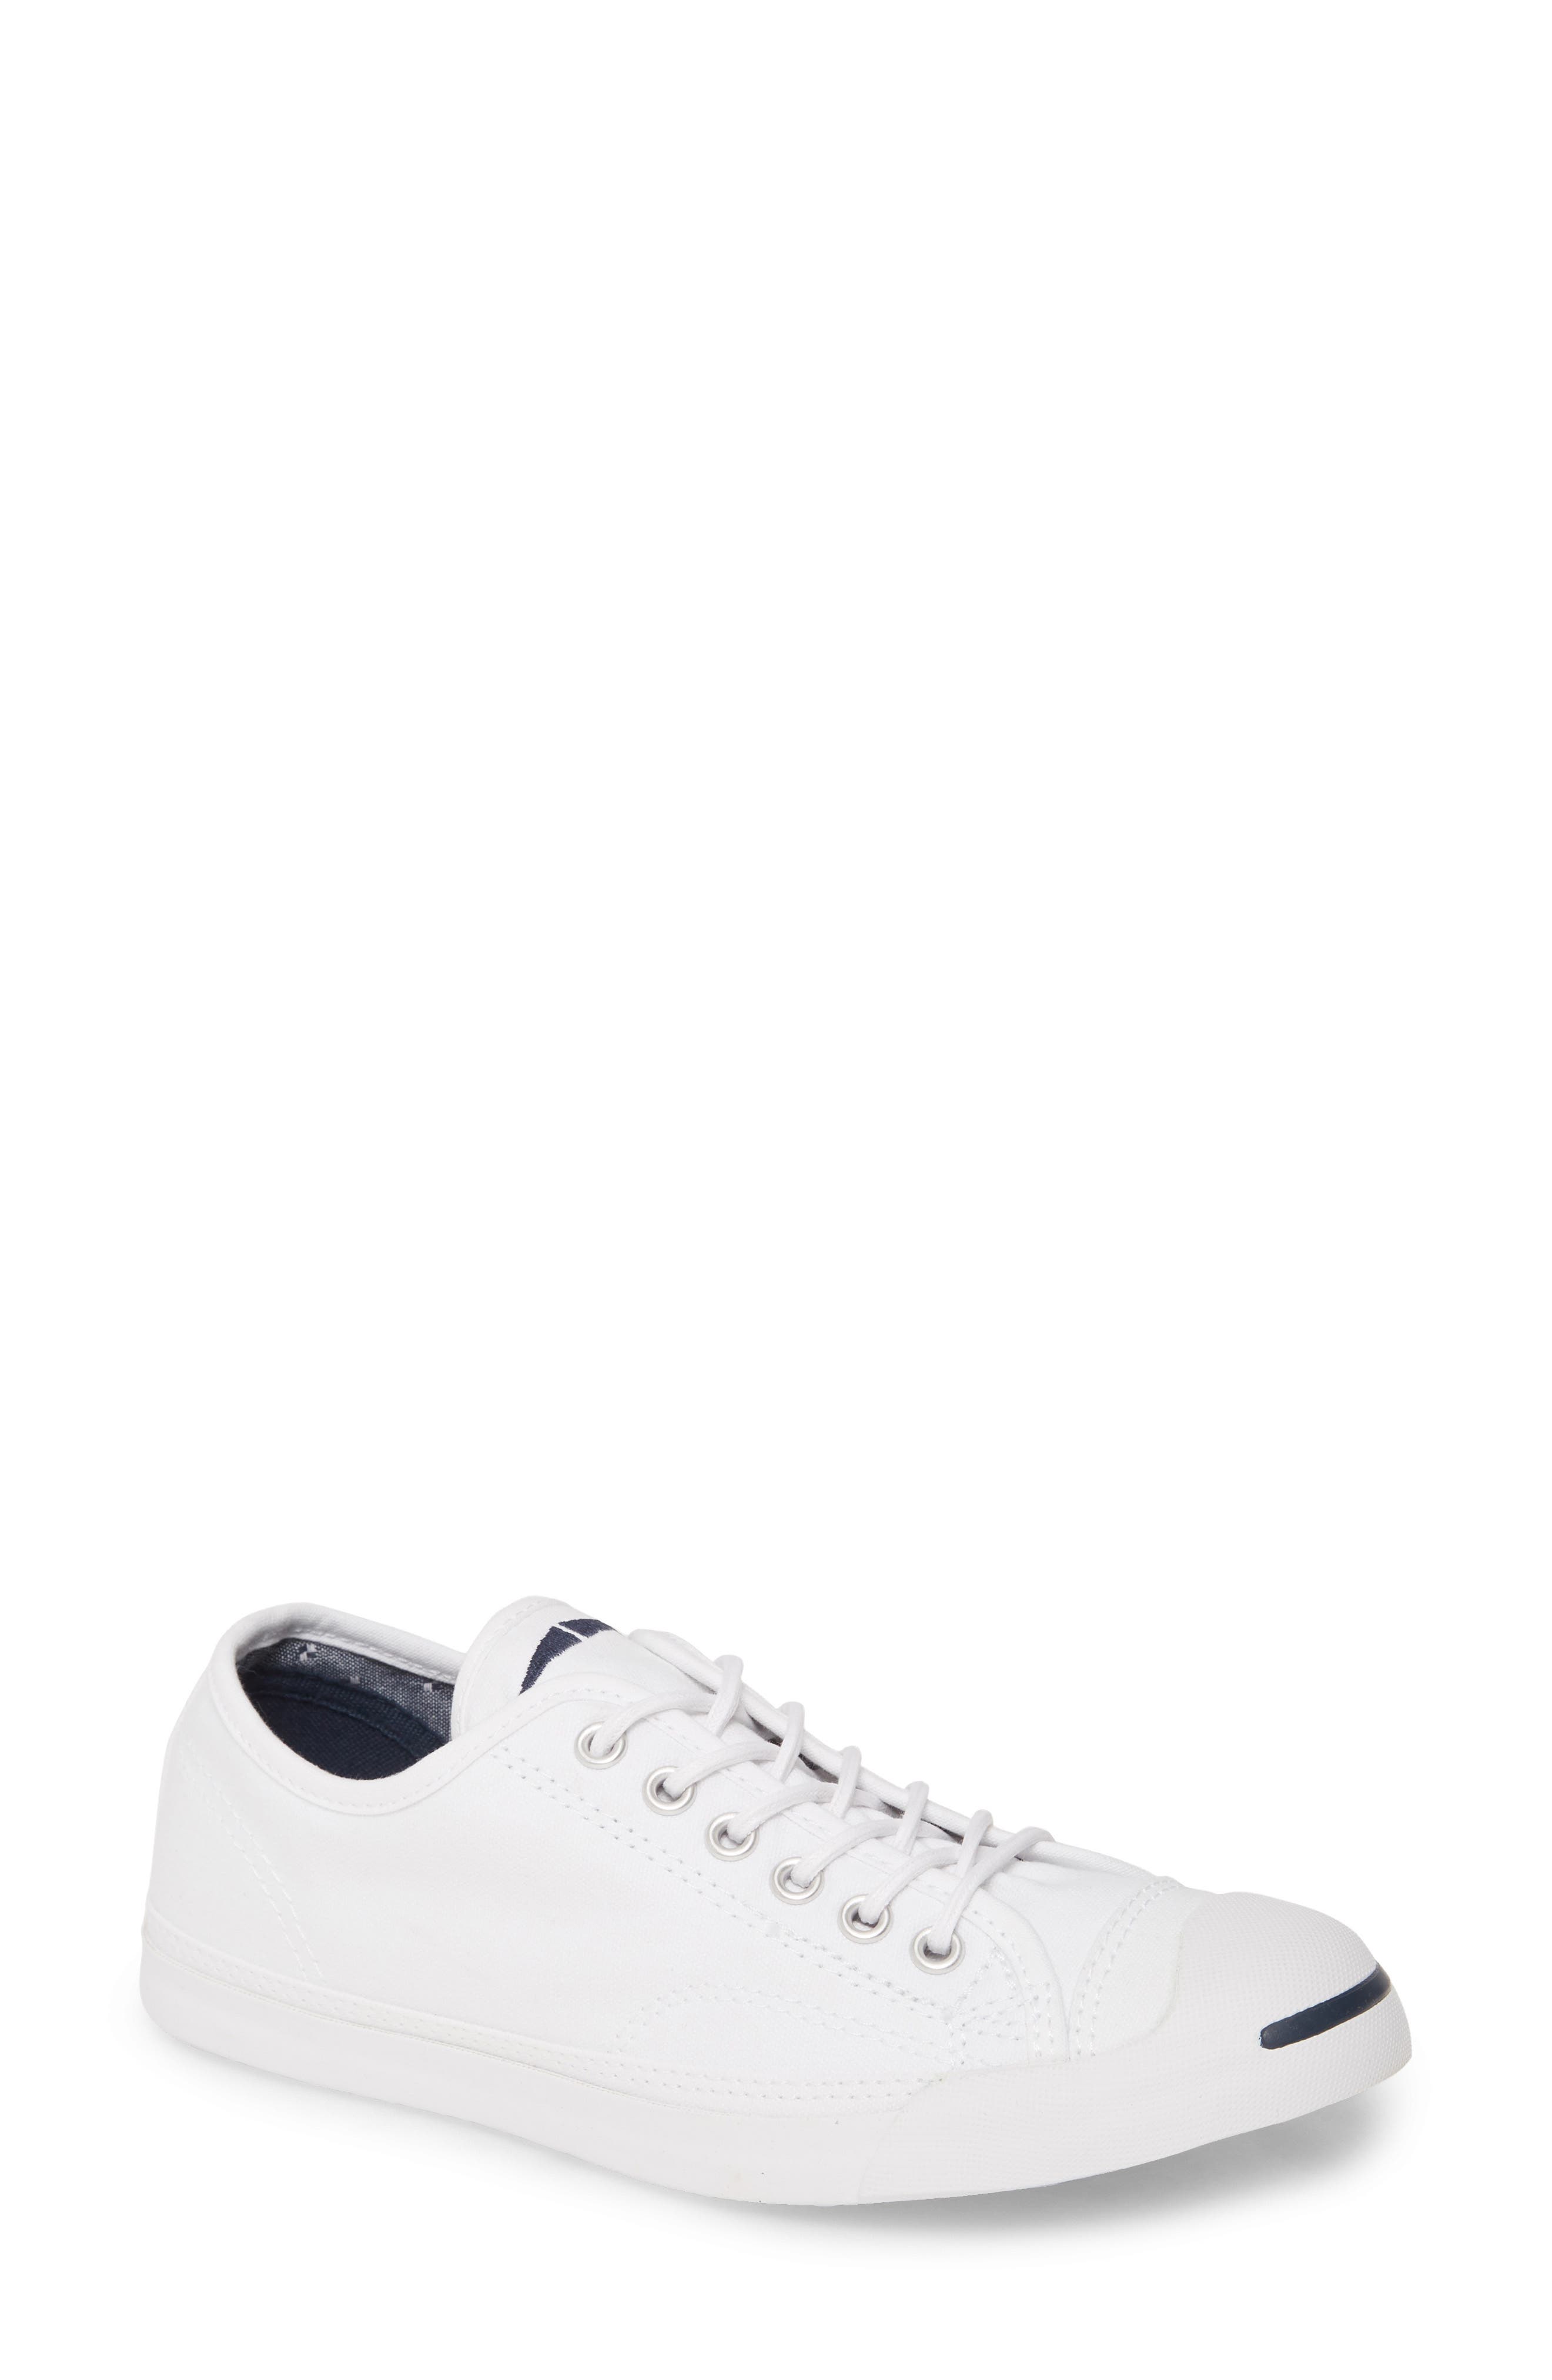 converse jack purcell nordstrom